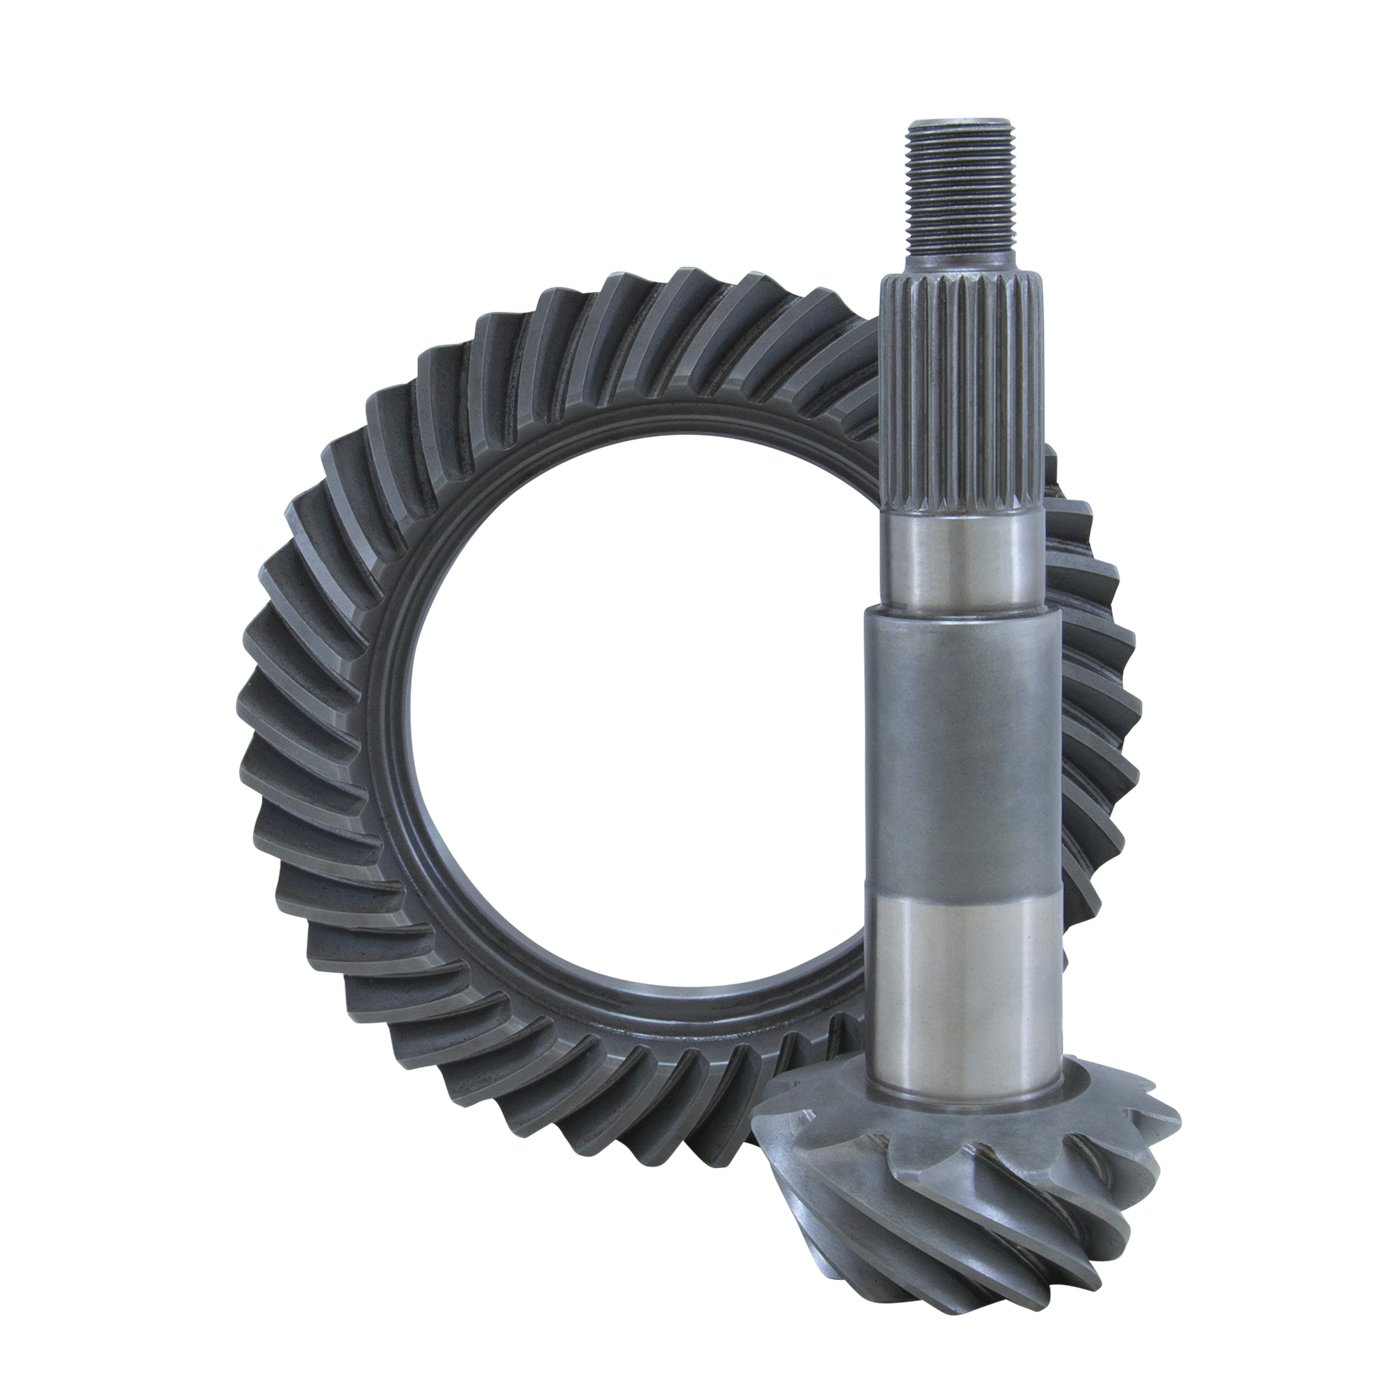 USA Standard ZG D30-308 Ring & Pinion Replacement Gear Set, For Dana 30, 3.08 Ratio